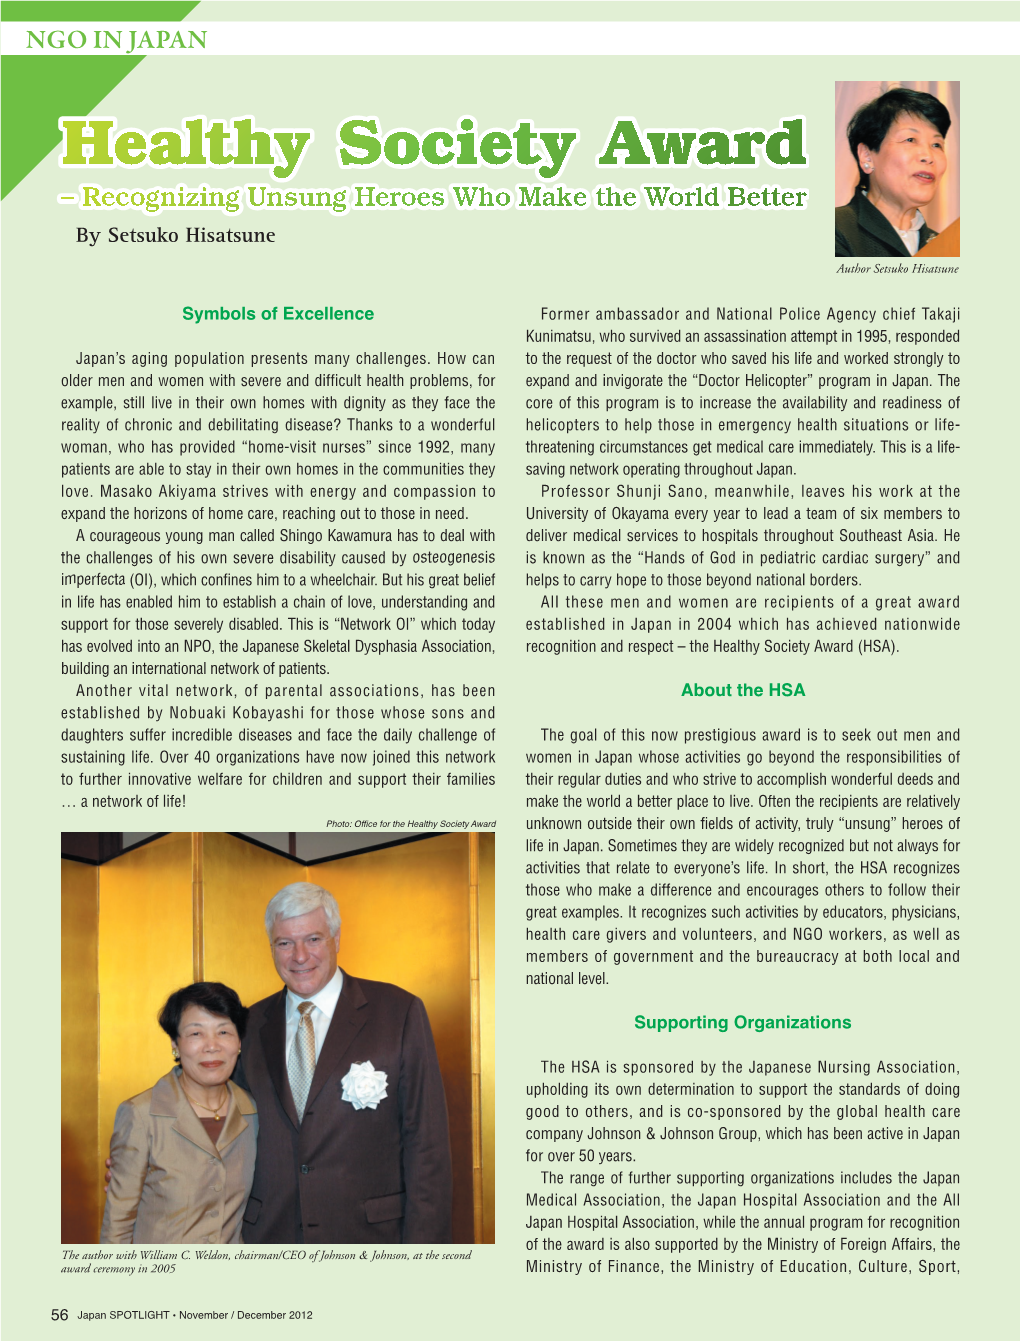 Healthy Society Award – Recognizing Unsung Heroes Who Make the World Better by Setsuko Hisatsune